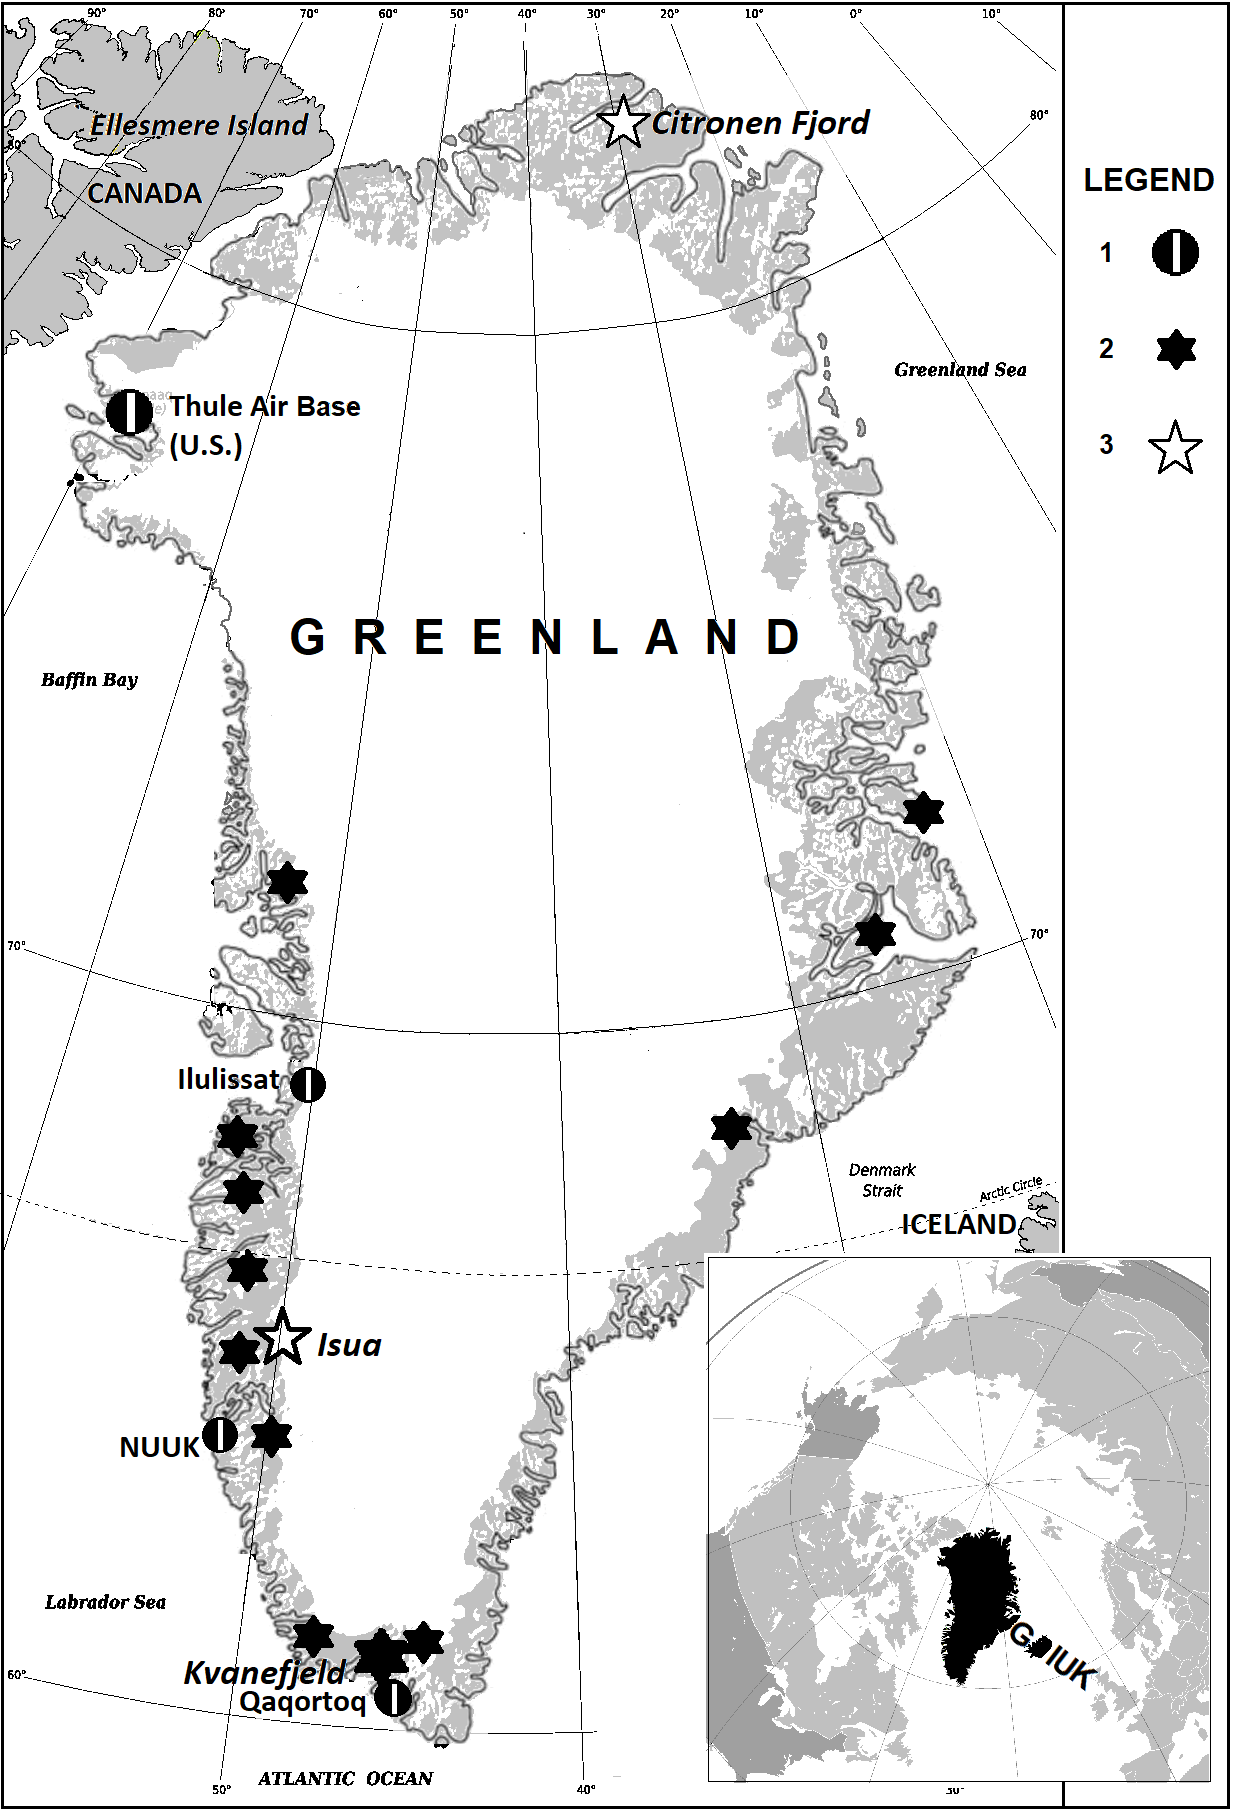 Map of Greenland with actual or potential Chinese and U.S. projects. Legend: 1 airfield/airports, 2 deposits of rare earth elements, 3 Chinese non-REE mining projects.